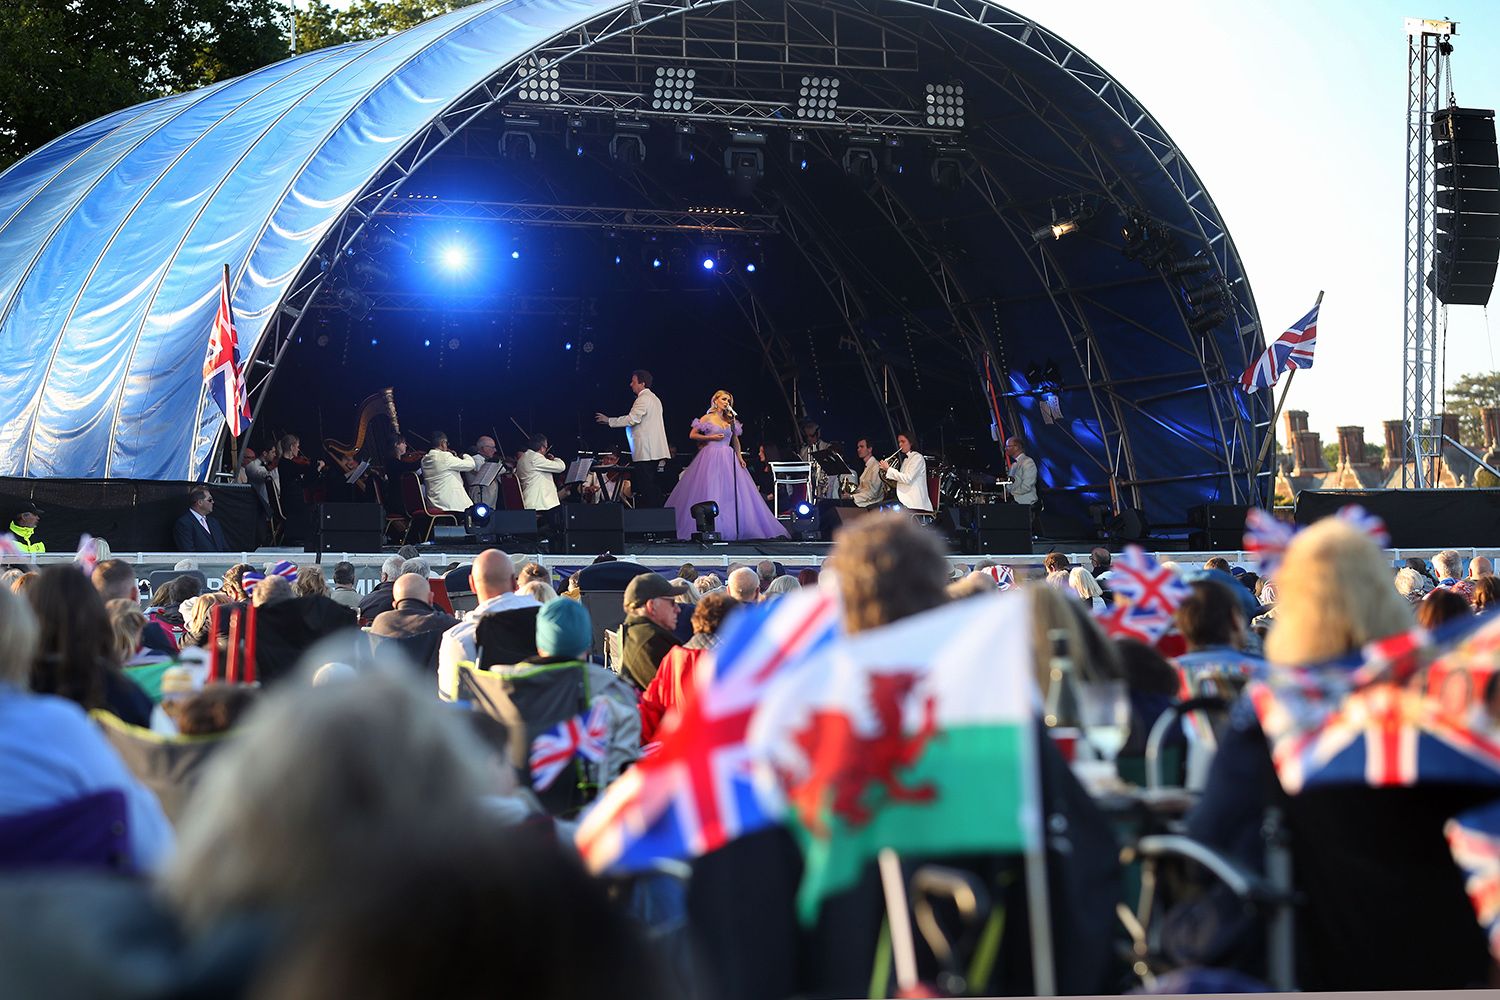 Radio 2 Concert In The Park 2022